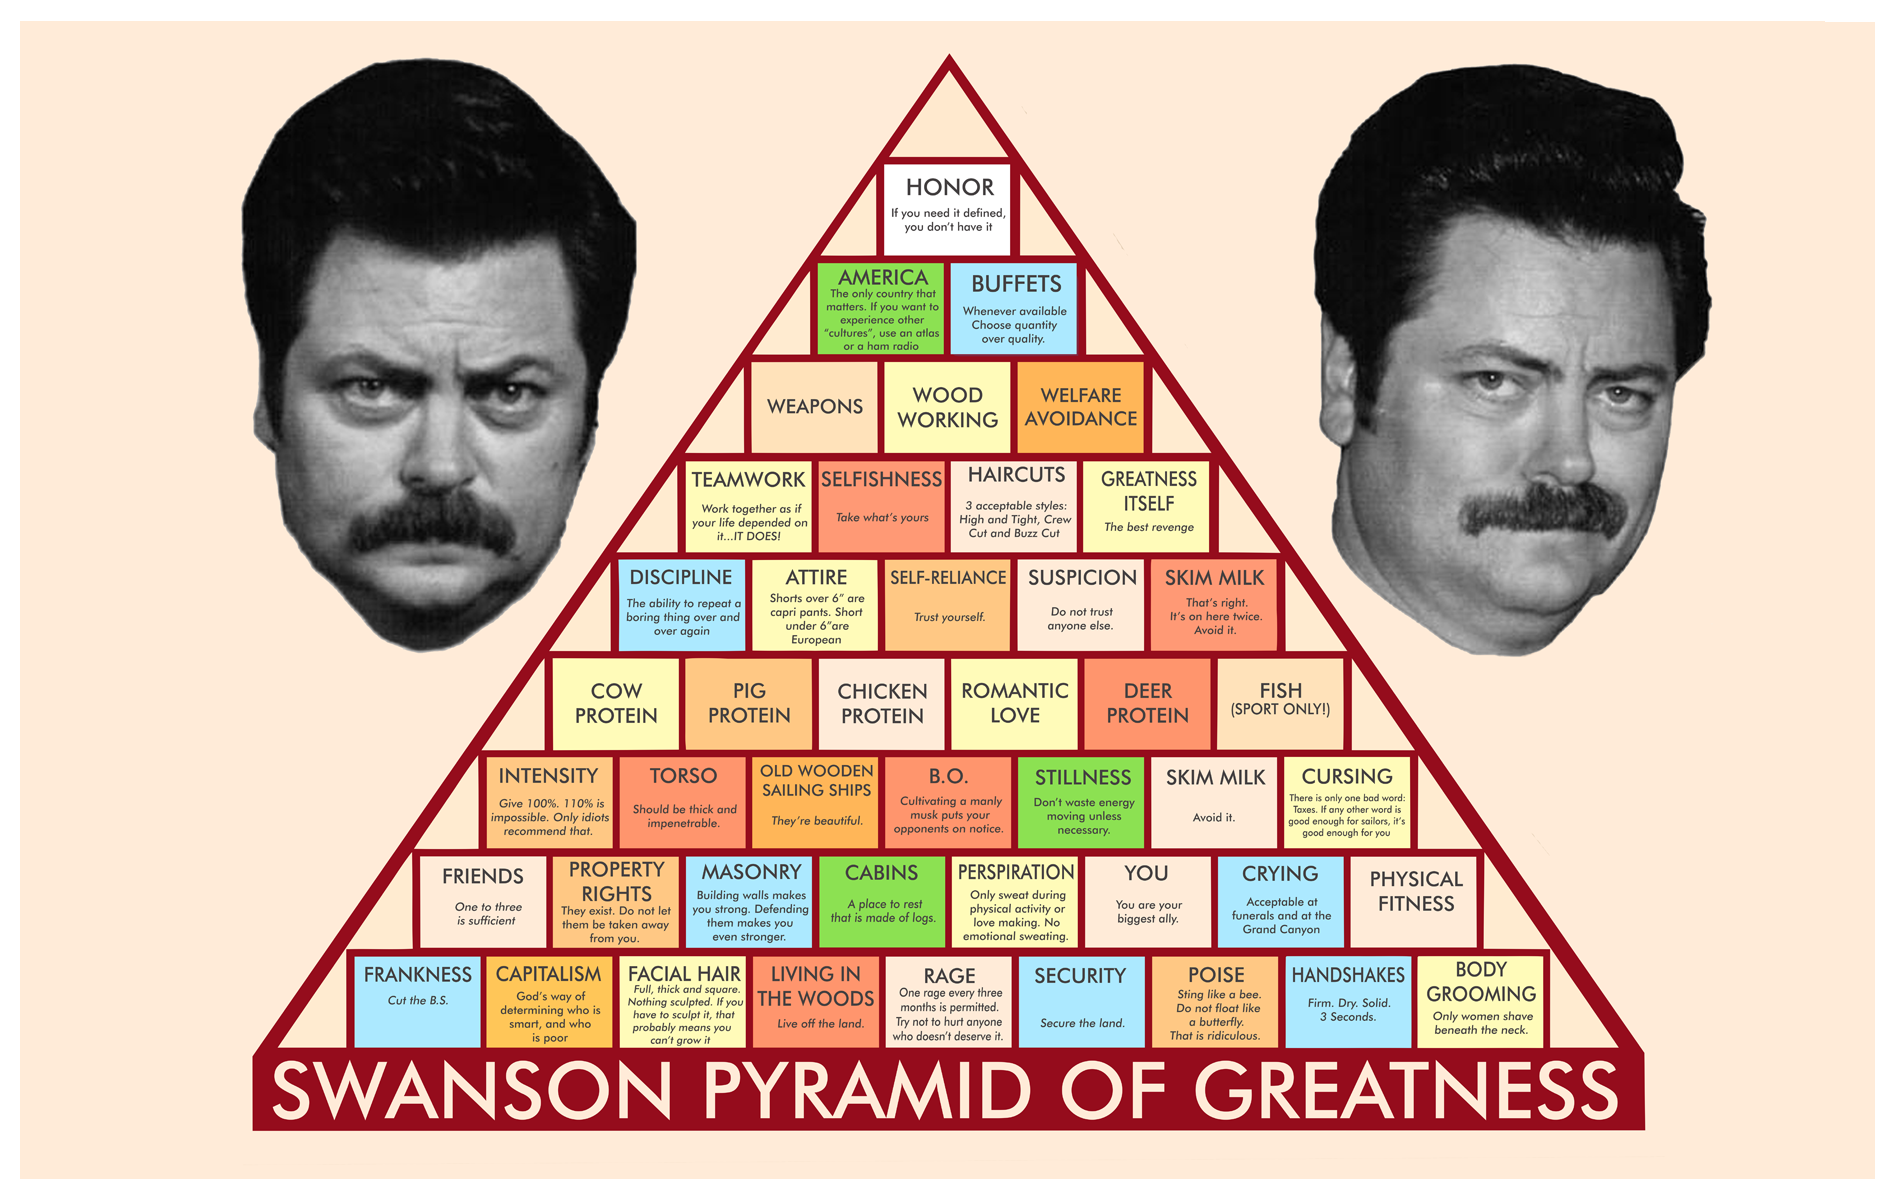 Ron Swanson Pyramid Of Greatness Wallpaper